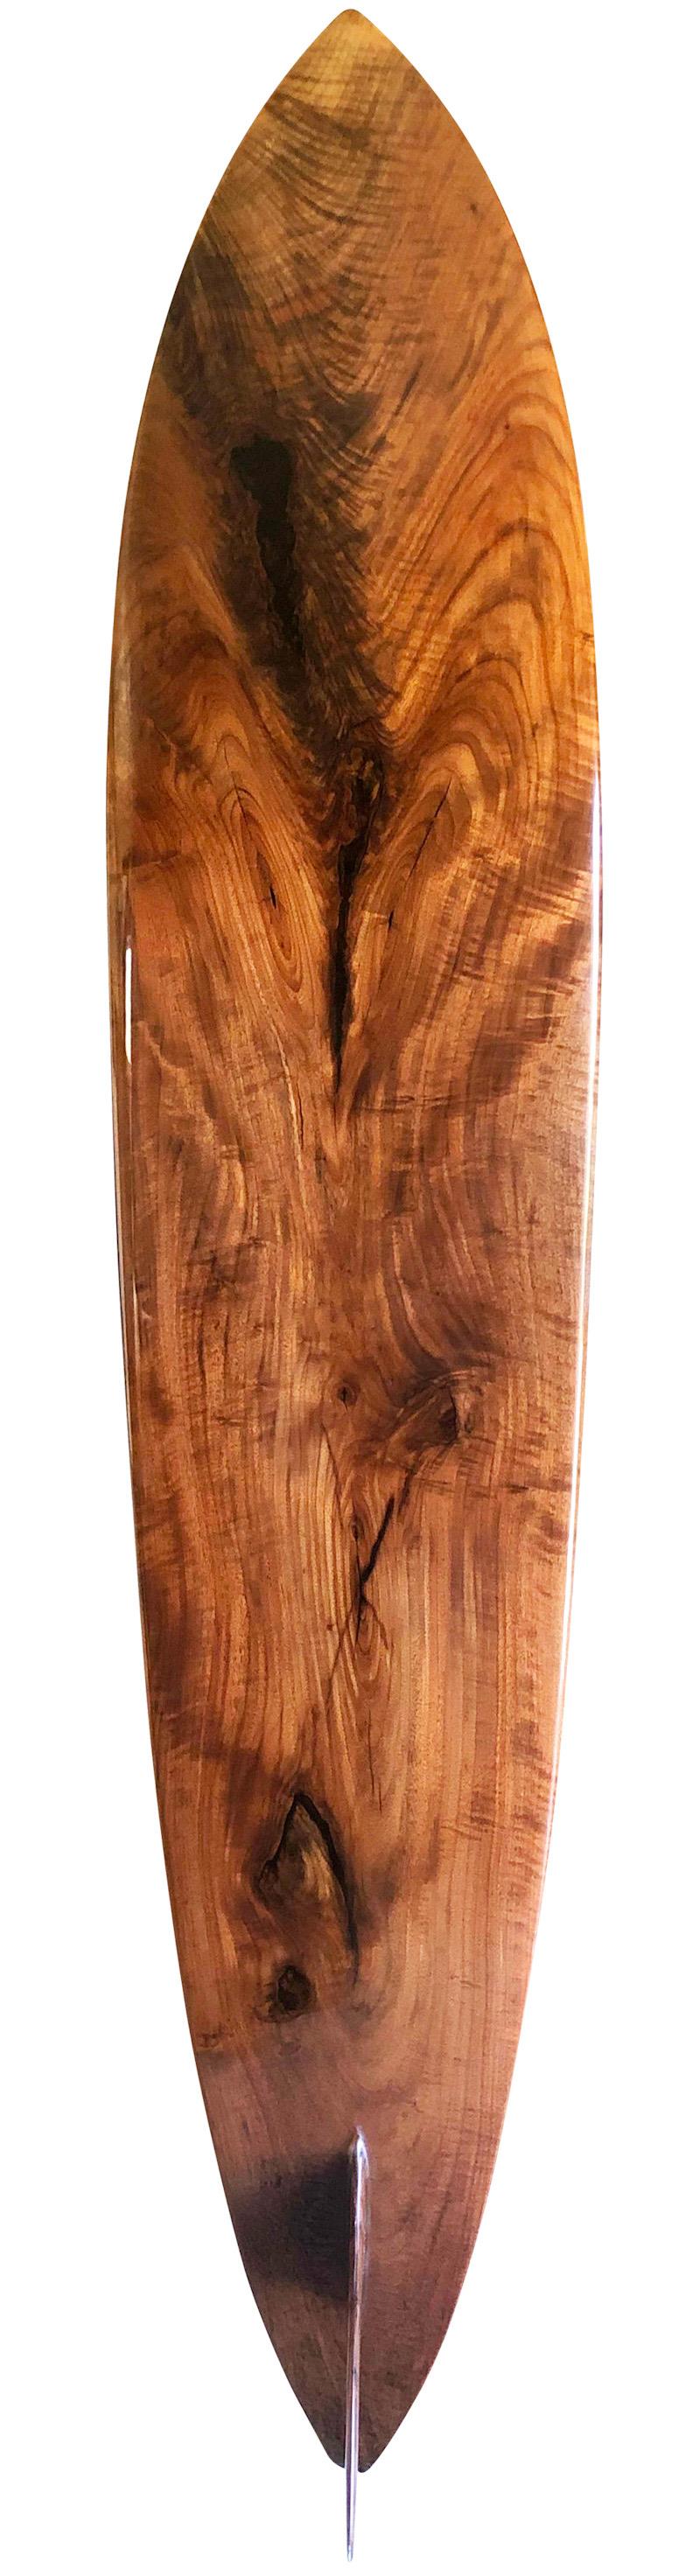 Late-1960s replica Greg Noll Surf Center Hawaii wooden surfboard. Features a transitional-era (late 1960’s style) pintail shape made with one of the rarest and most valuable hardwoods in North America, solid black walnut wood. This trophy surfboard